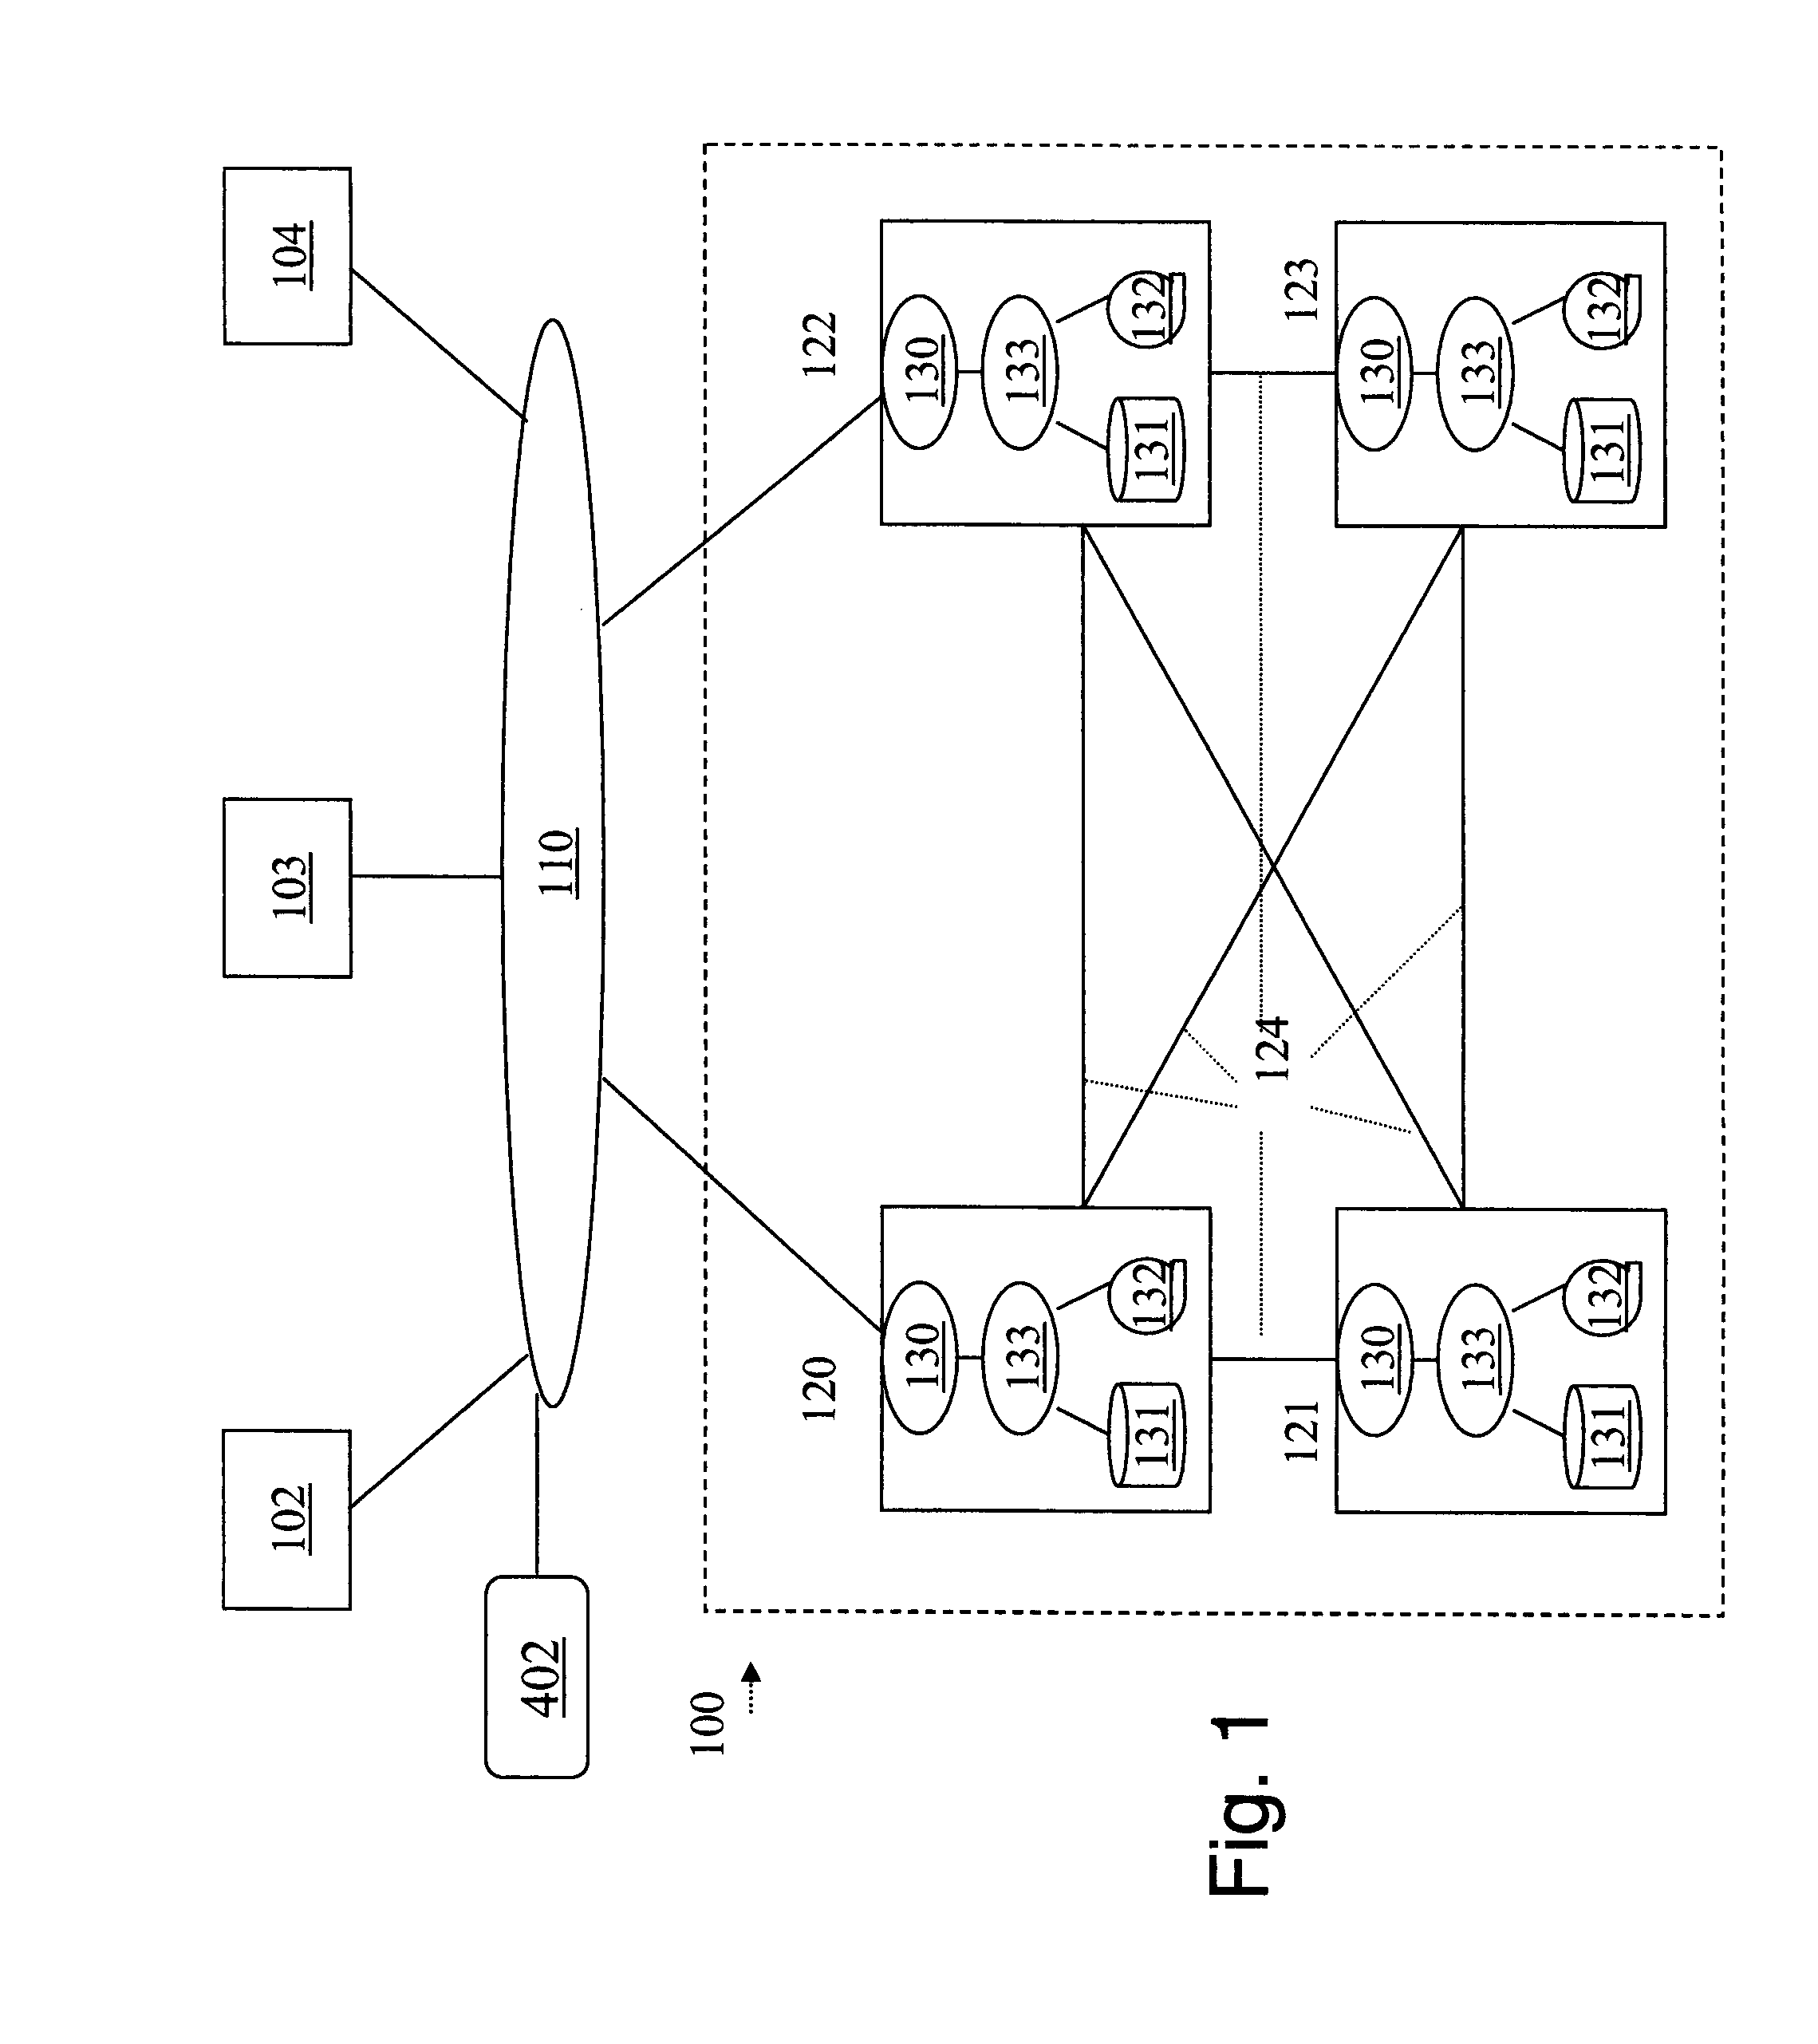 Method and Infrastructure for Storing Application Data in a Grid Application and Storage System